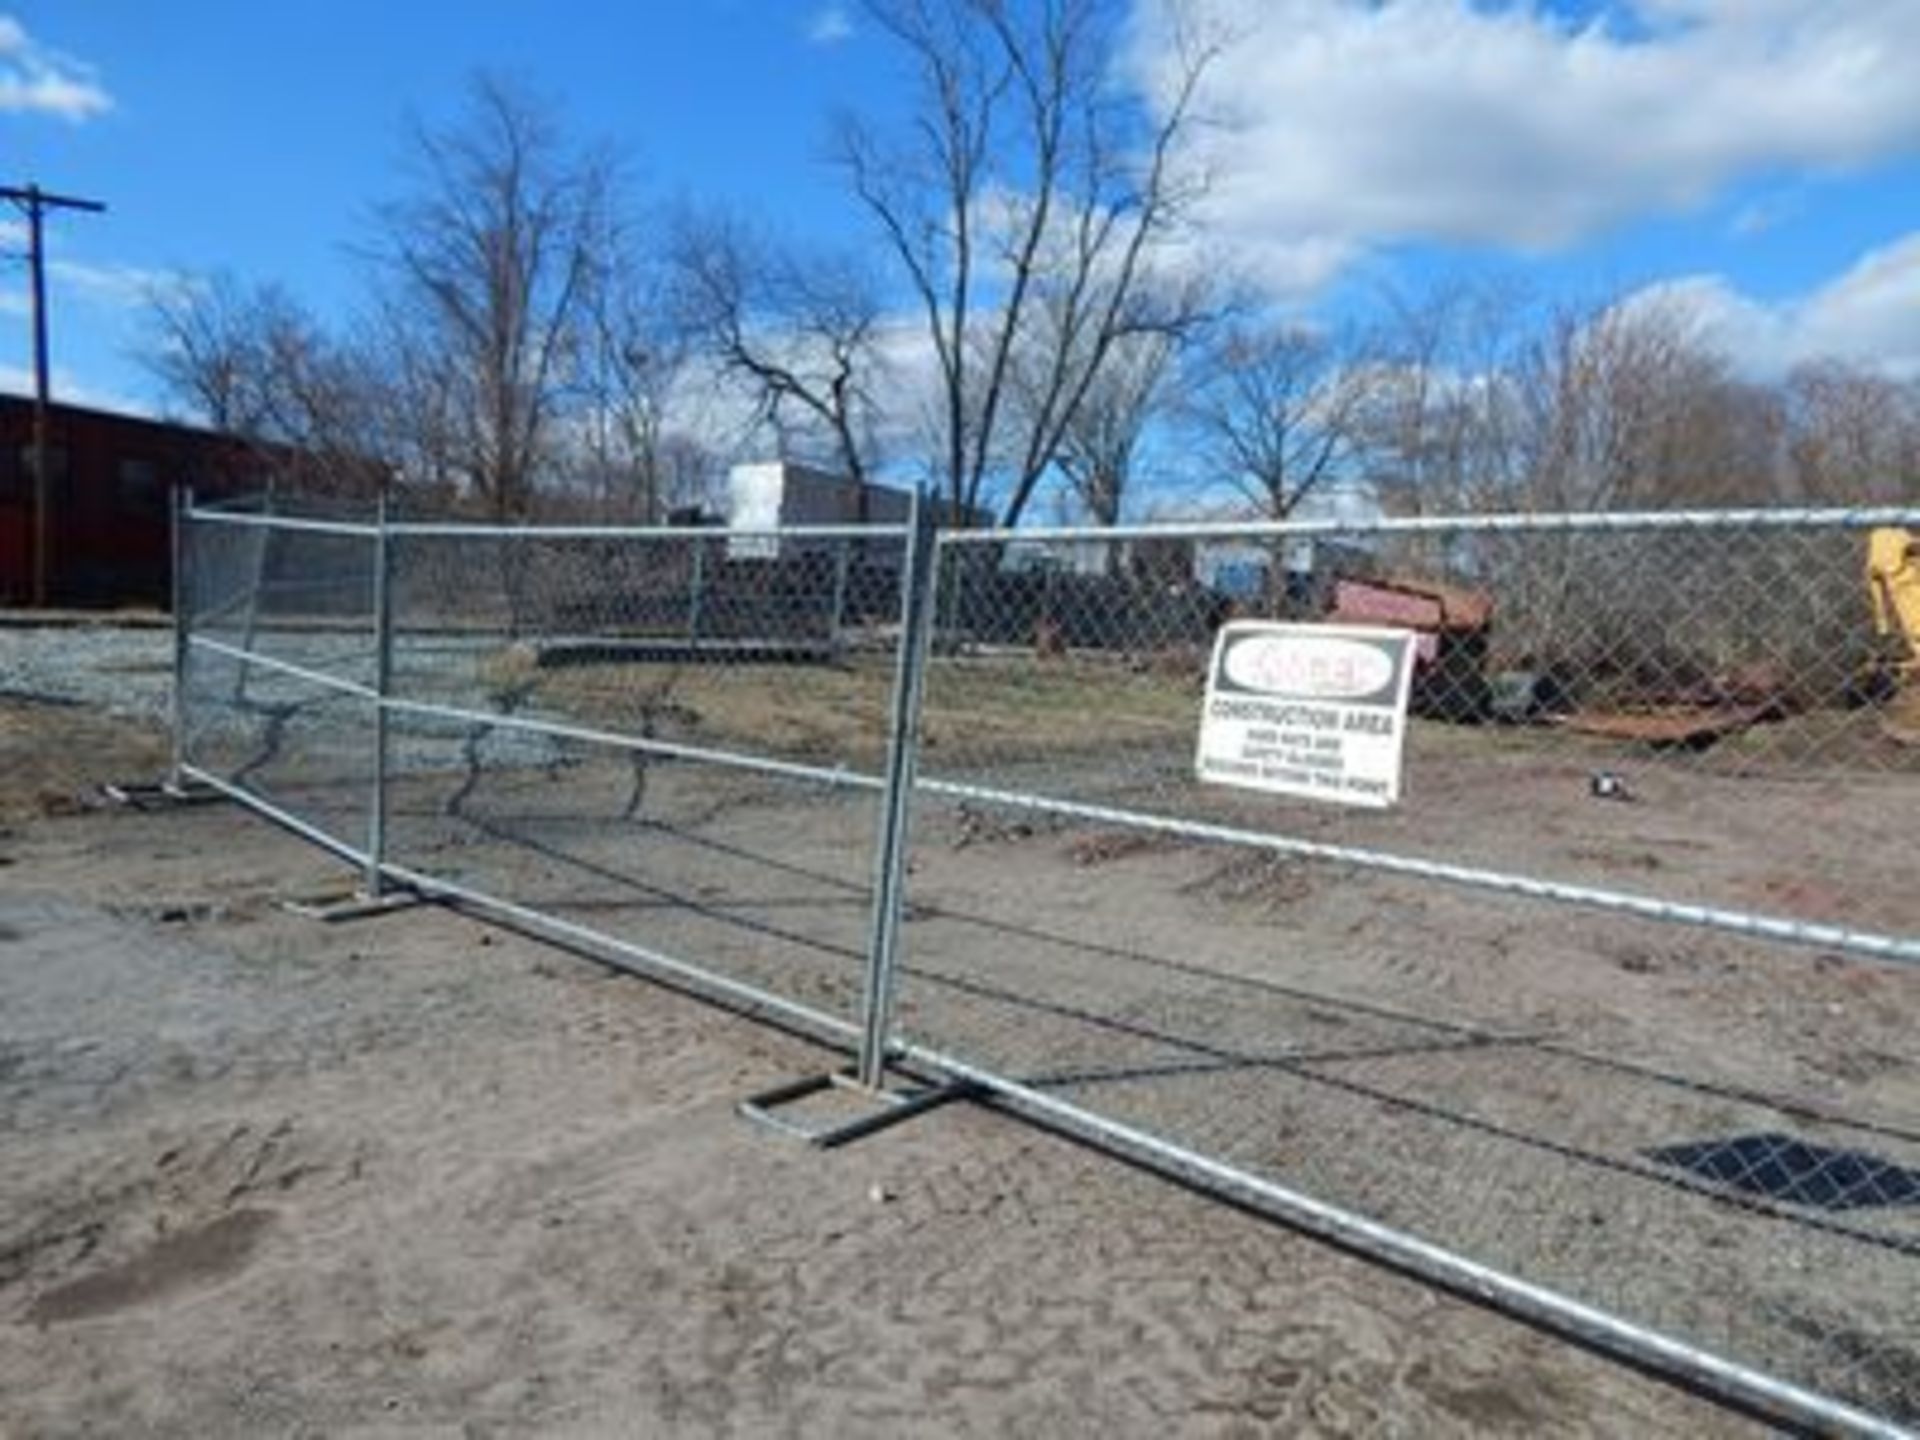 SECT.'S 10'6" X 6'6" TEMP. CHAIN LINK FENCE